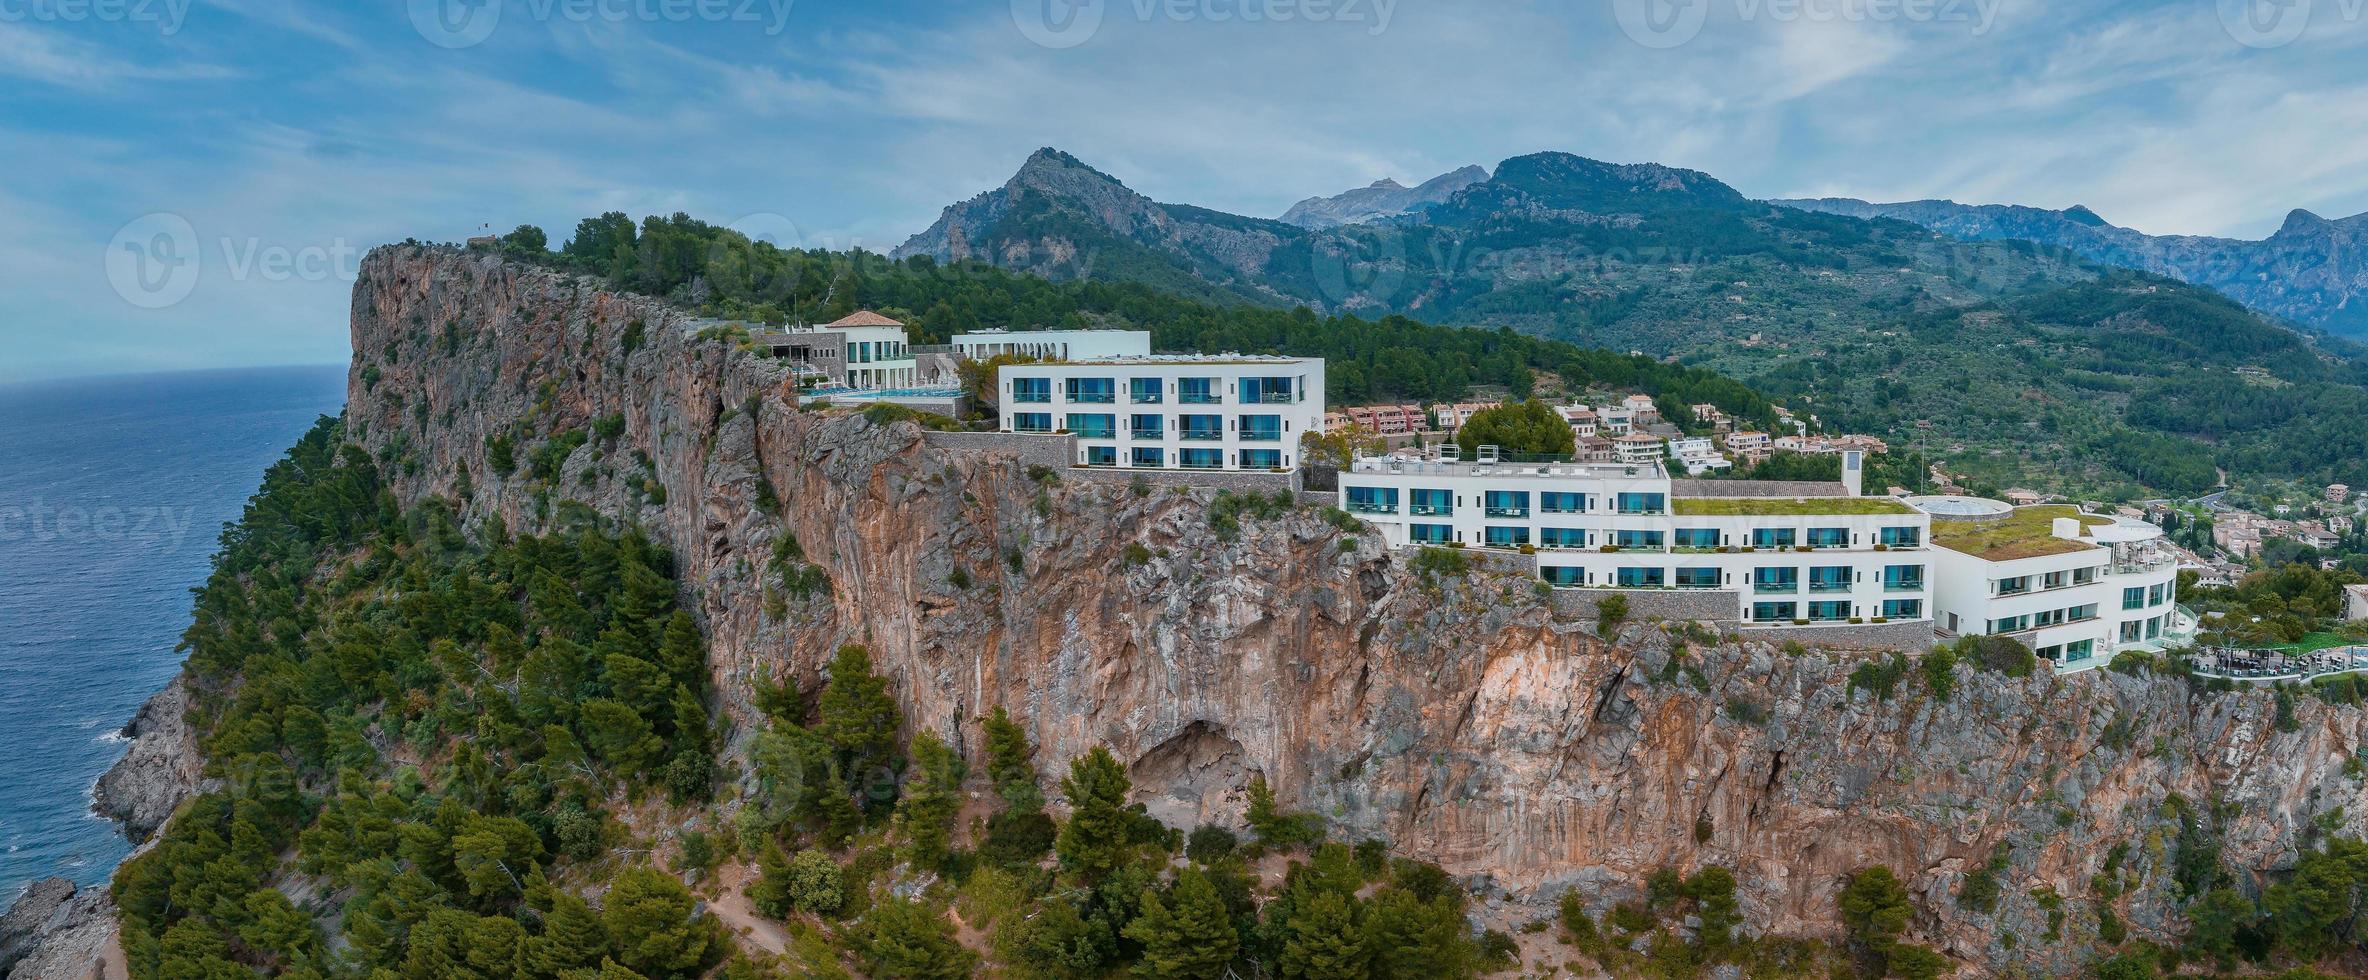 Aerial view of the luxury cliff house hotel on top of the cliff on the island of Mallorca. photo